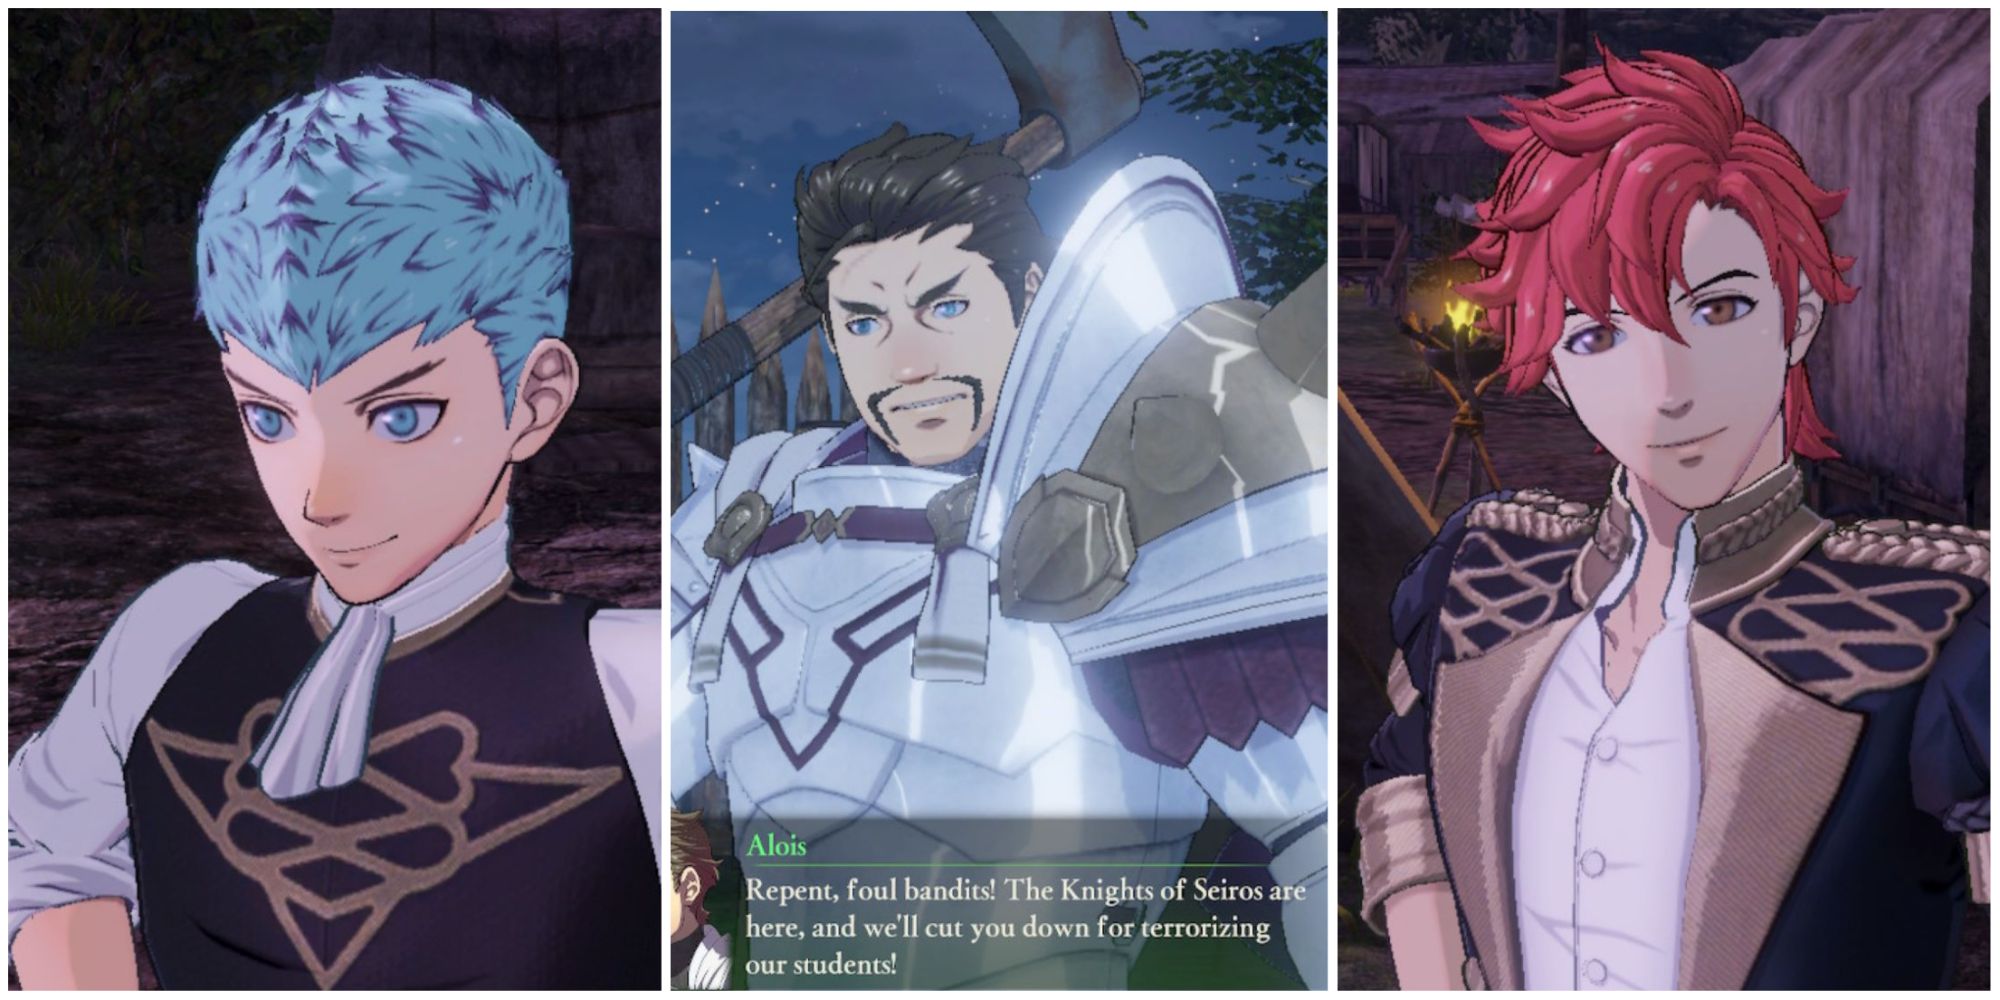 Fire Emblem Warriors: Three Hopes review: Gang's all here